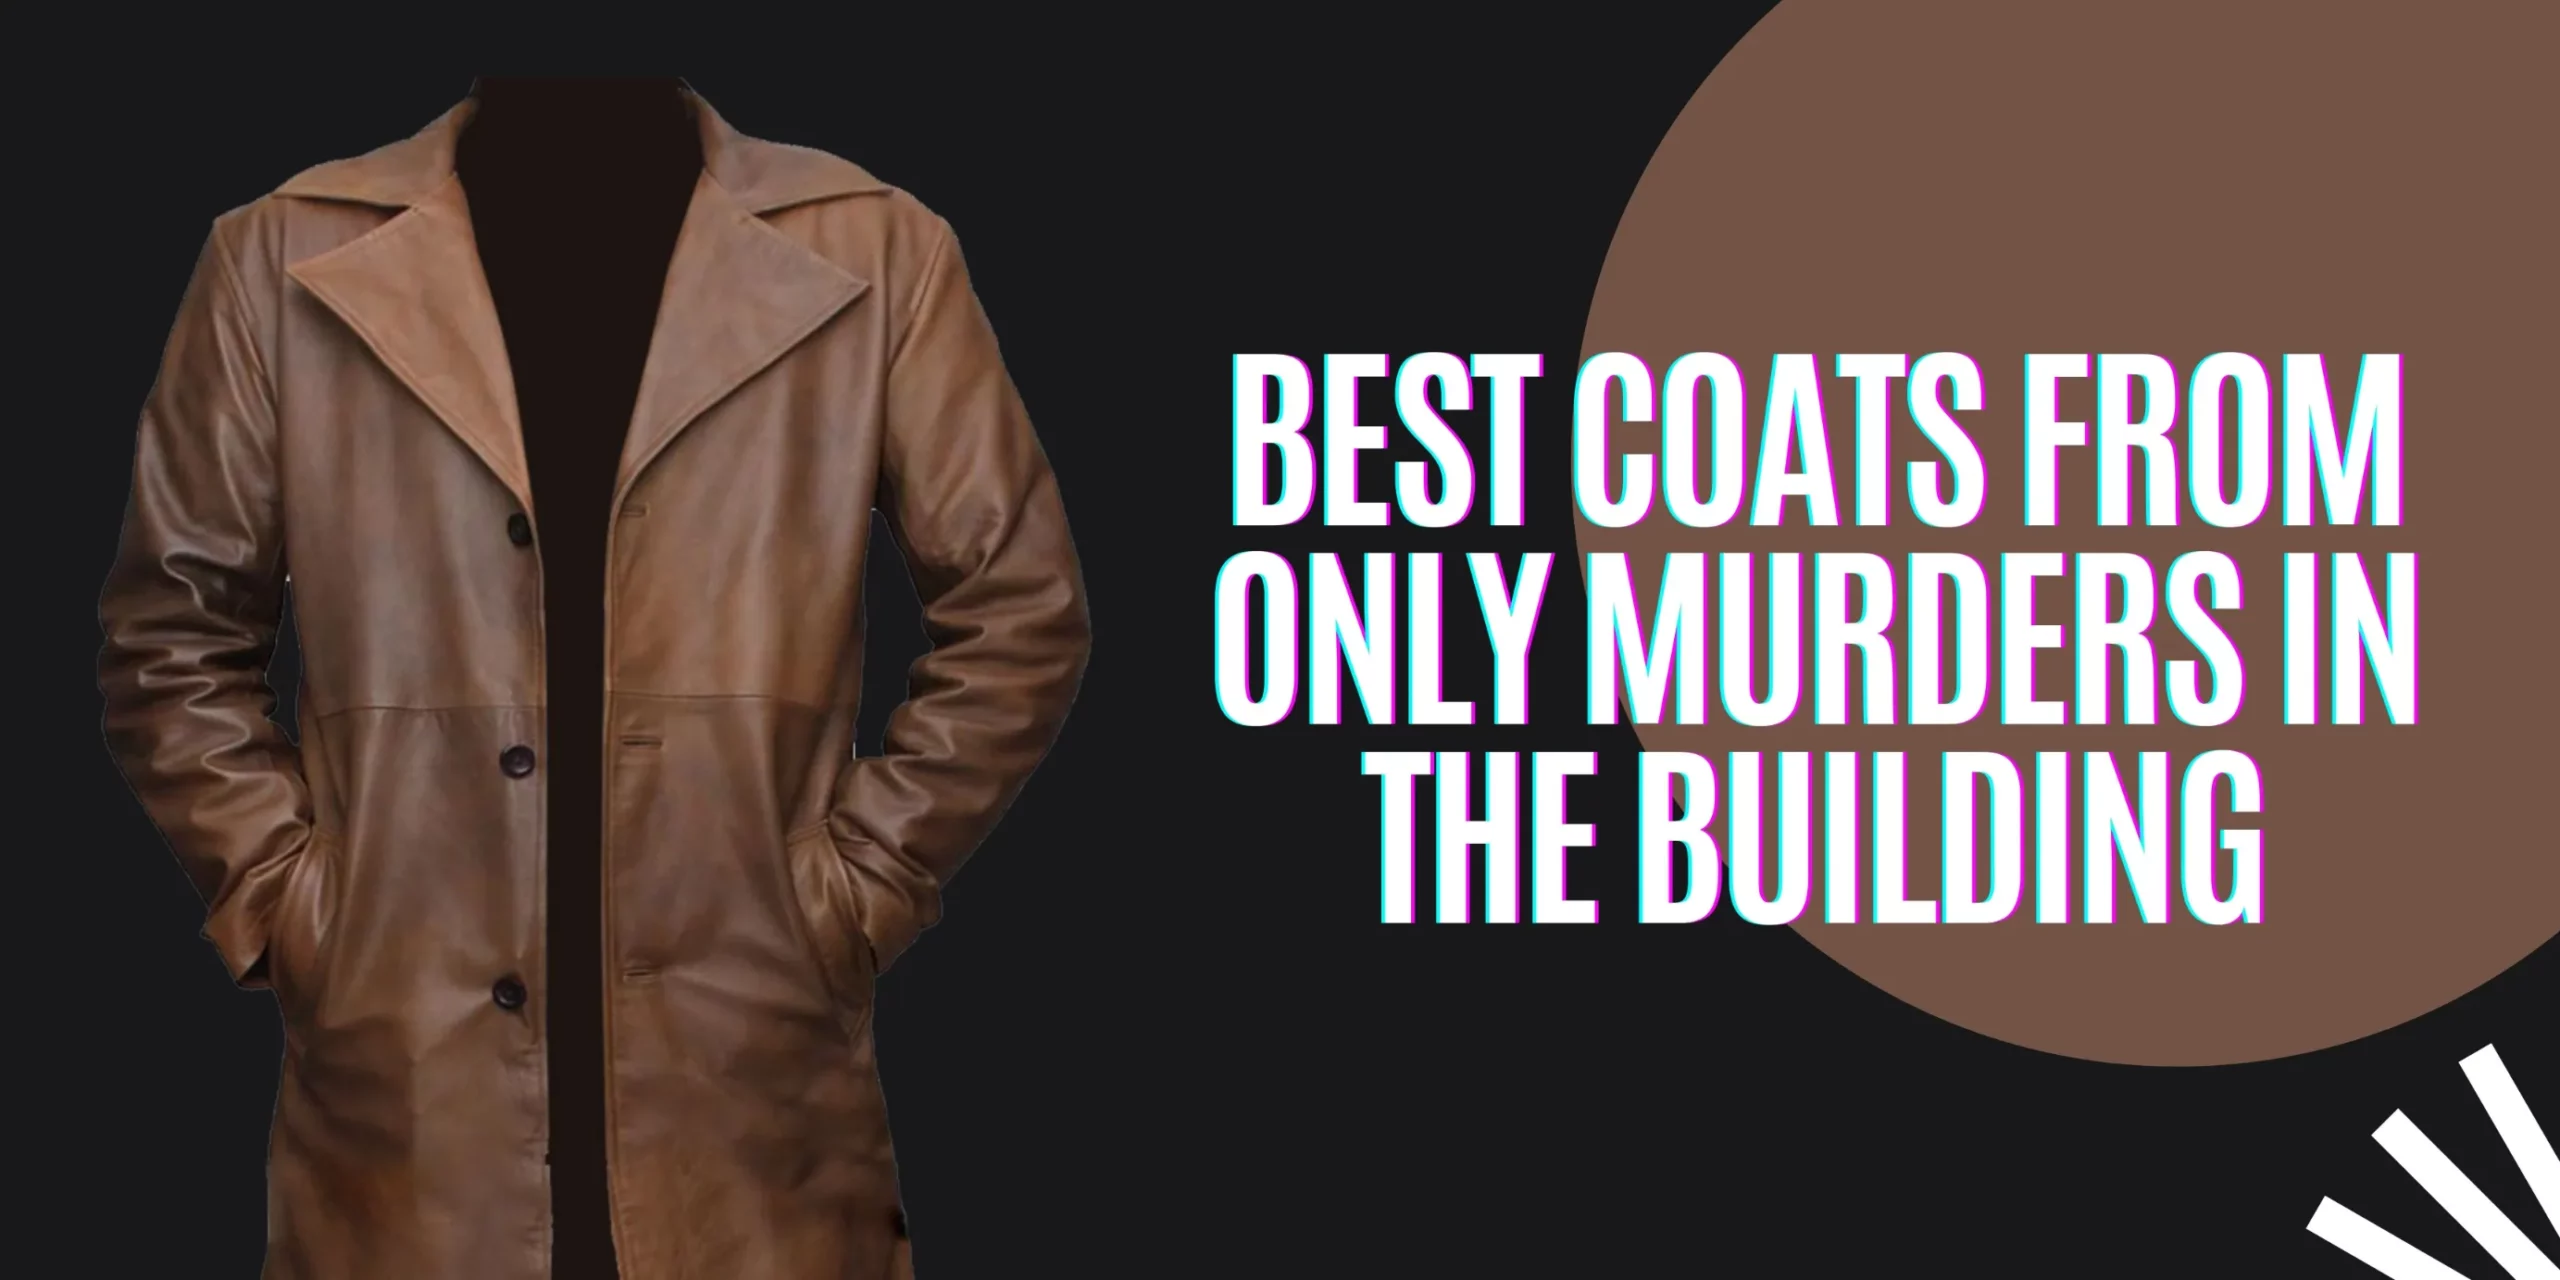 Only Murders in the Building Best Coats